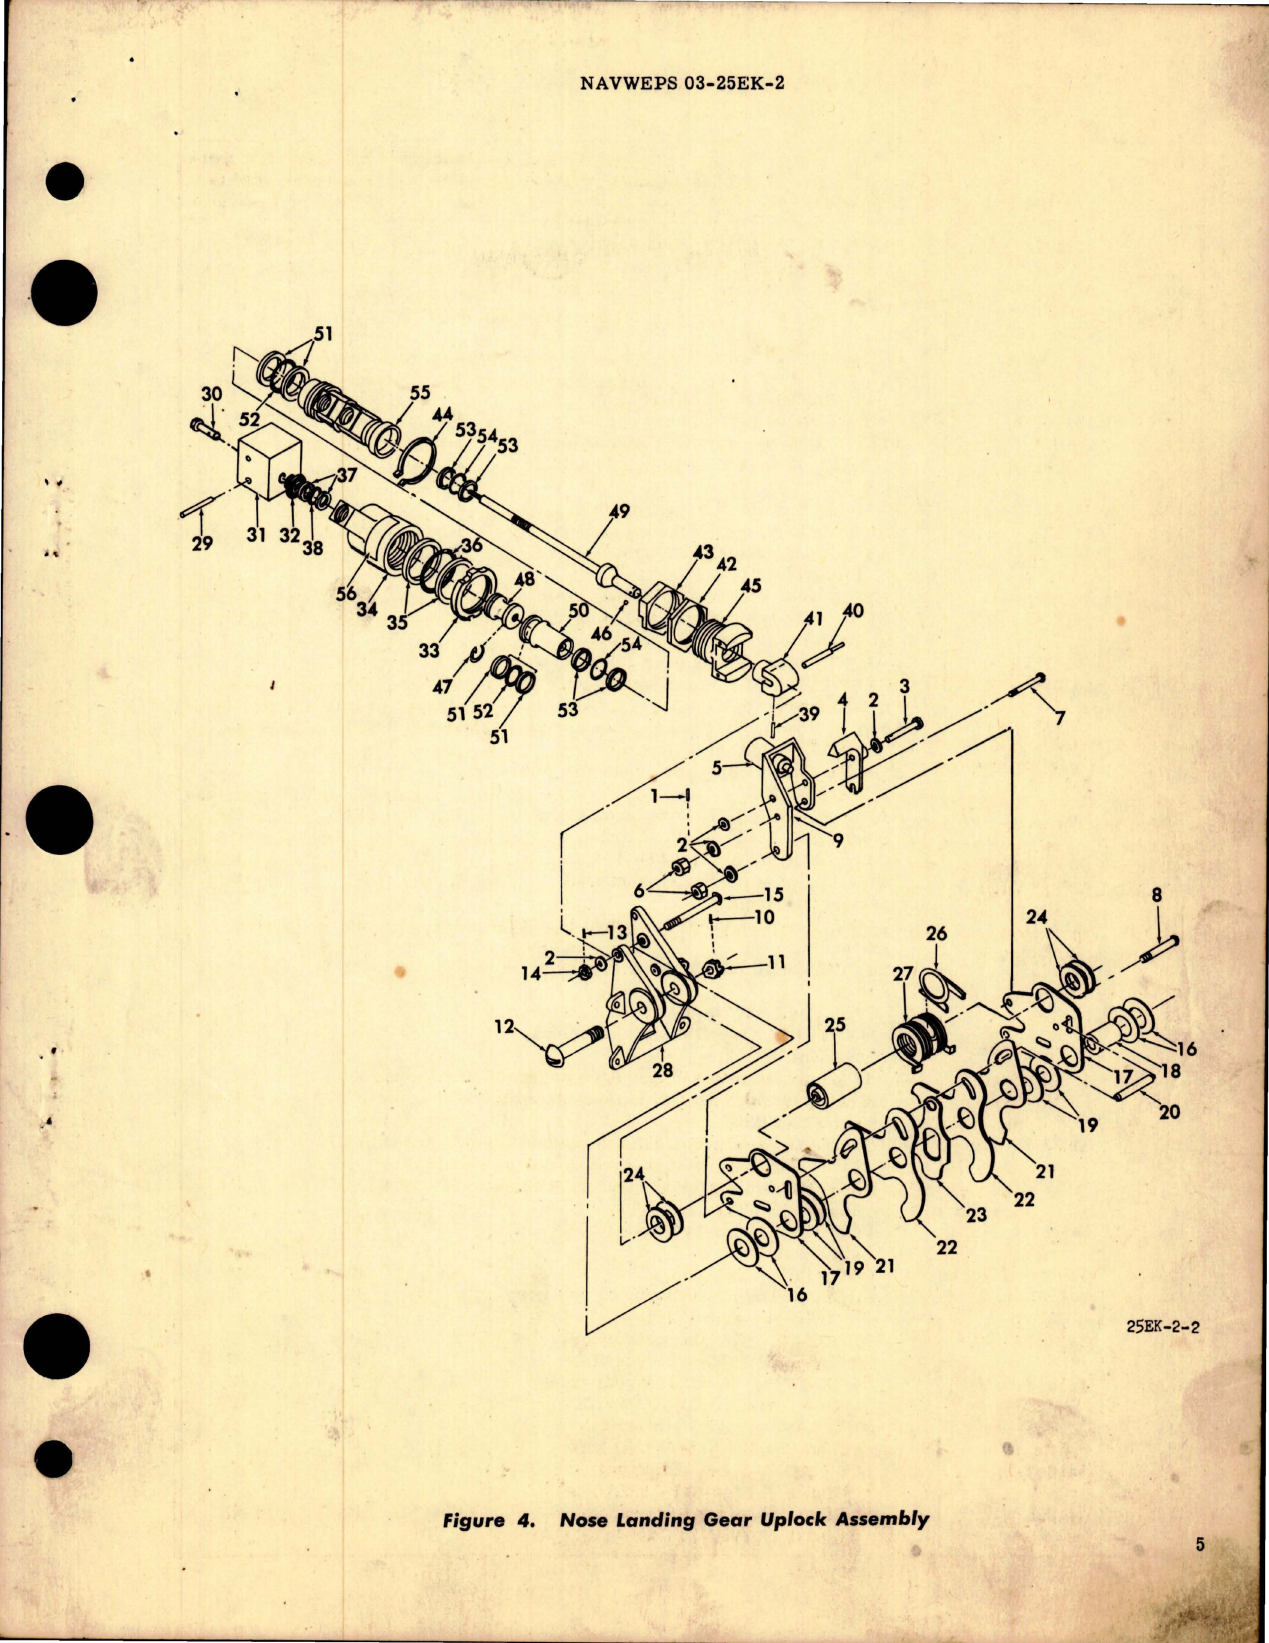 Sample page 5 from AirCorps Library document: Overhaul Instructions with Illustrated Parts Breakdown for Nose Landing Gear Uplock Assembly - Part 358800-1